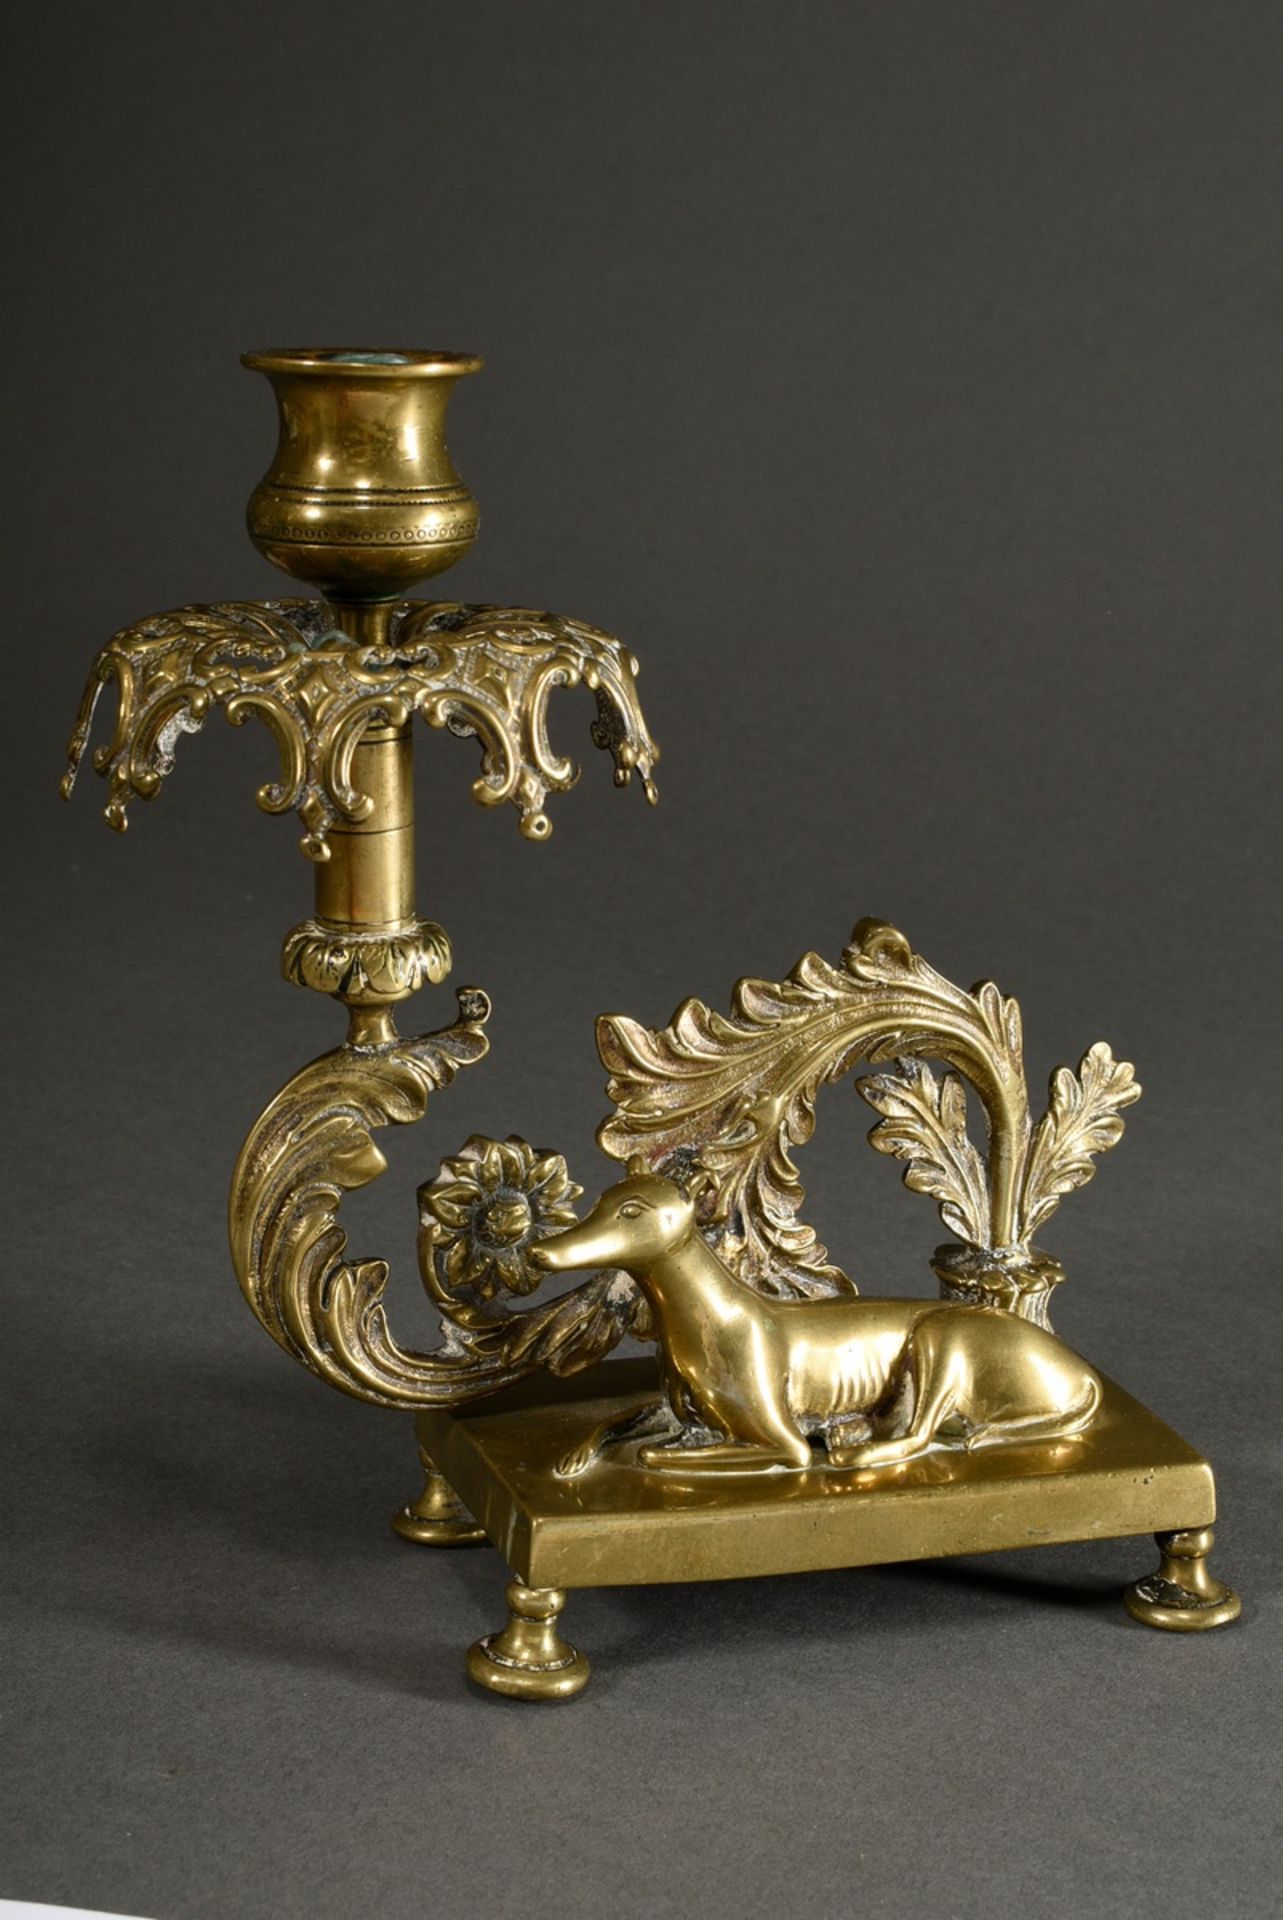 Pair of historicism yellow cast iron candlesticks with sculptural figures ‘Lying greyhounds’ and ve - Image 7 of 7